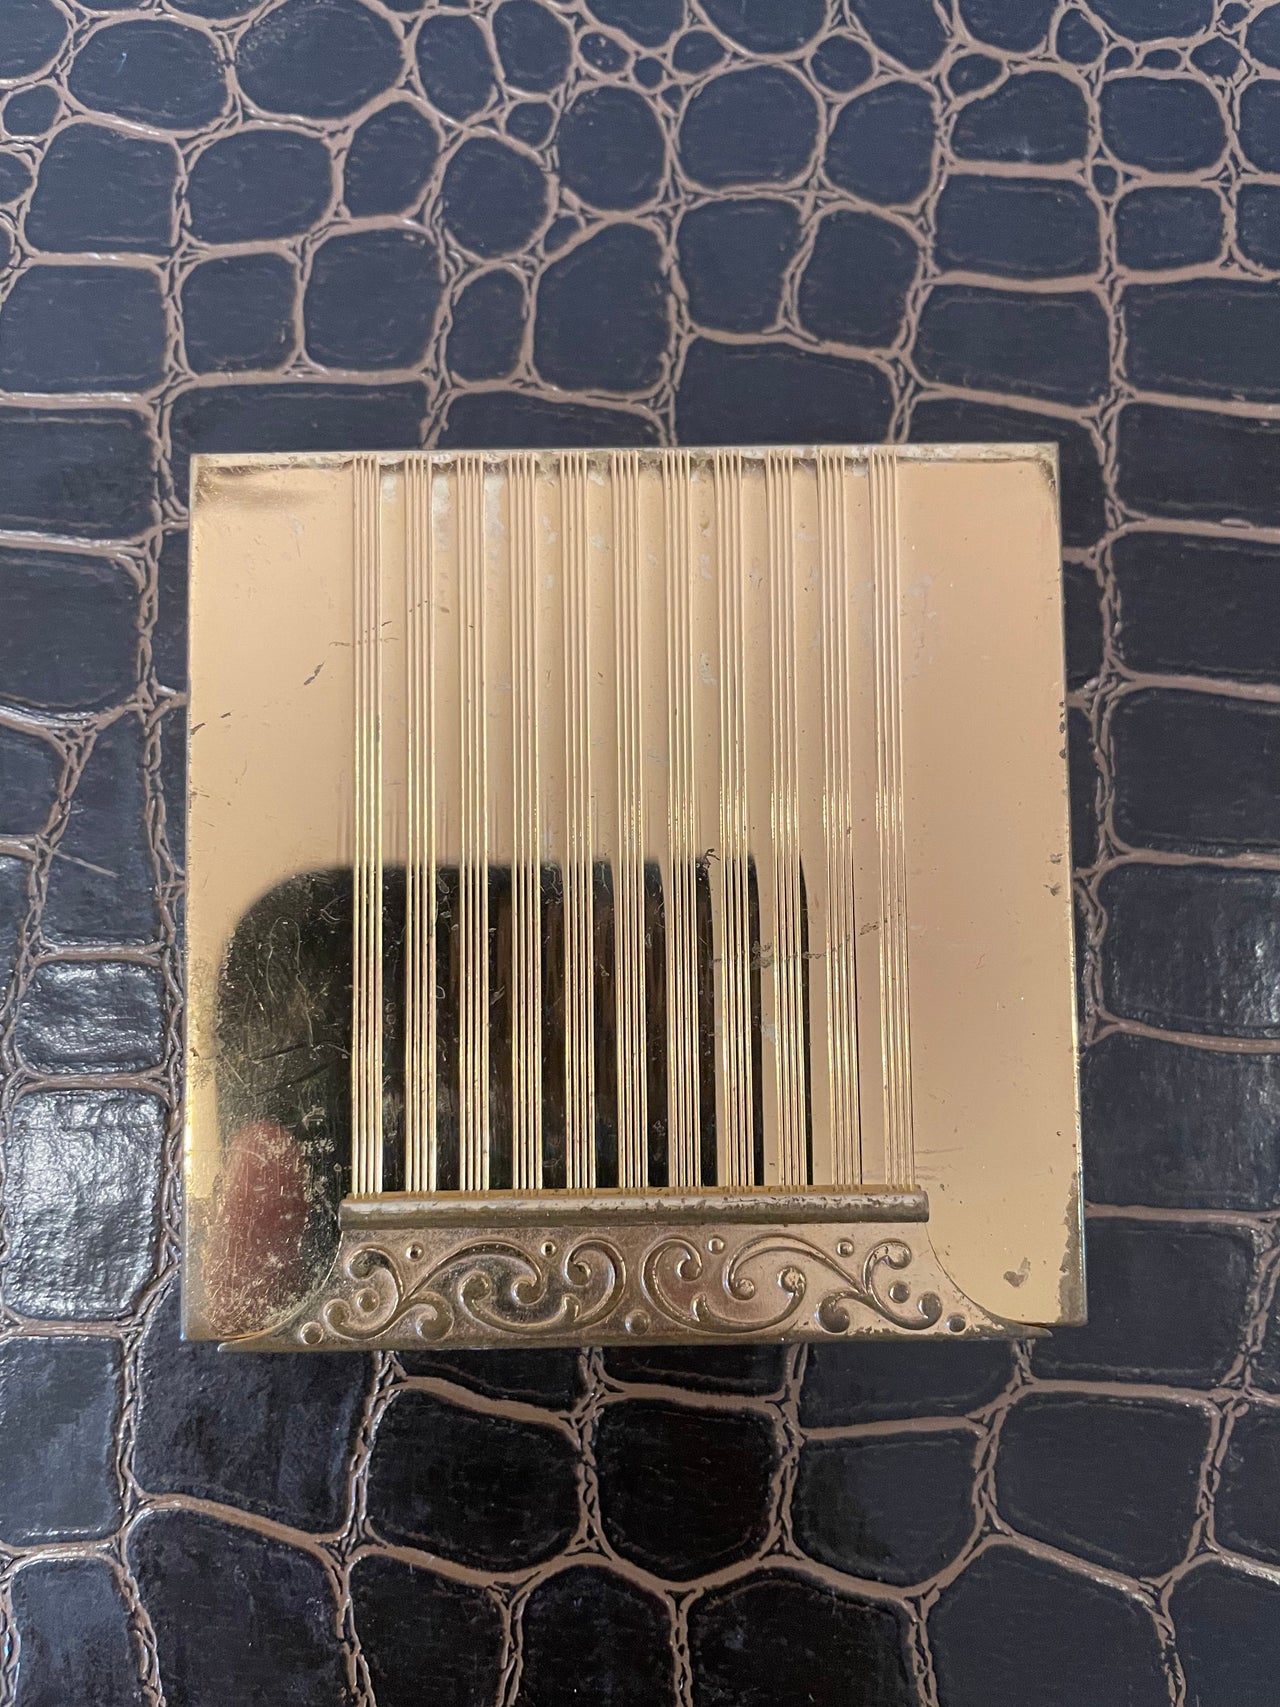 Gold Avon Compact with Stripes and Filigree Bloomers and Frocks 